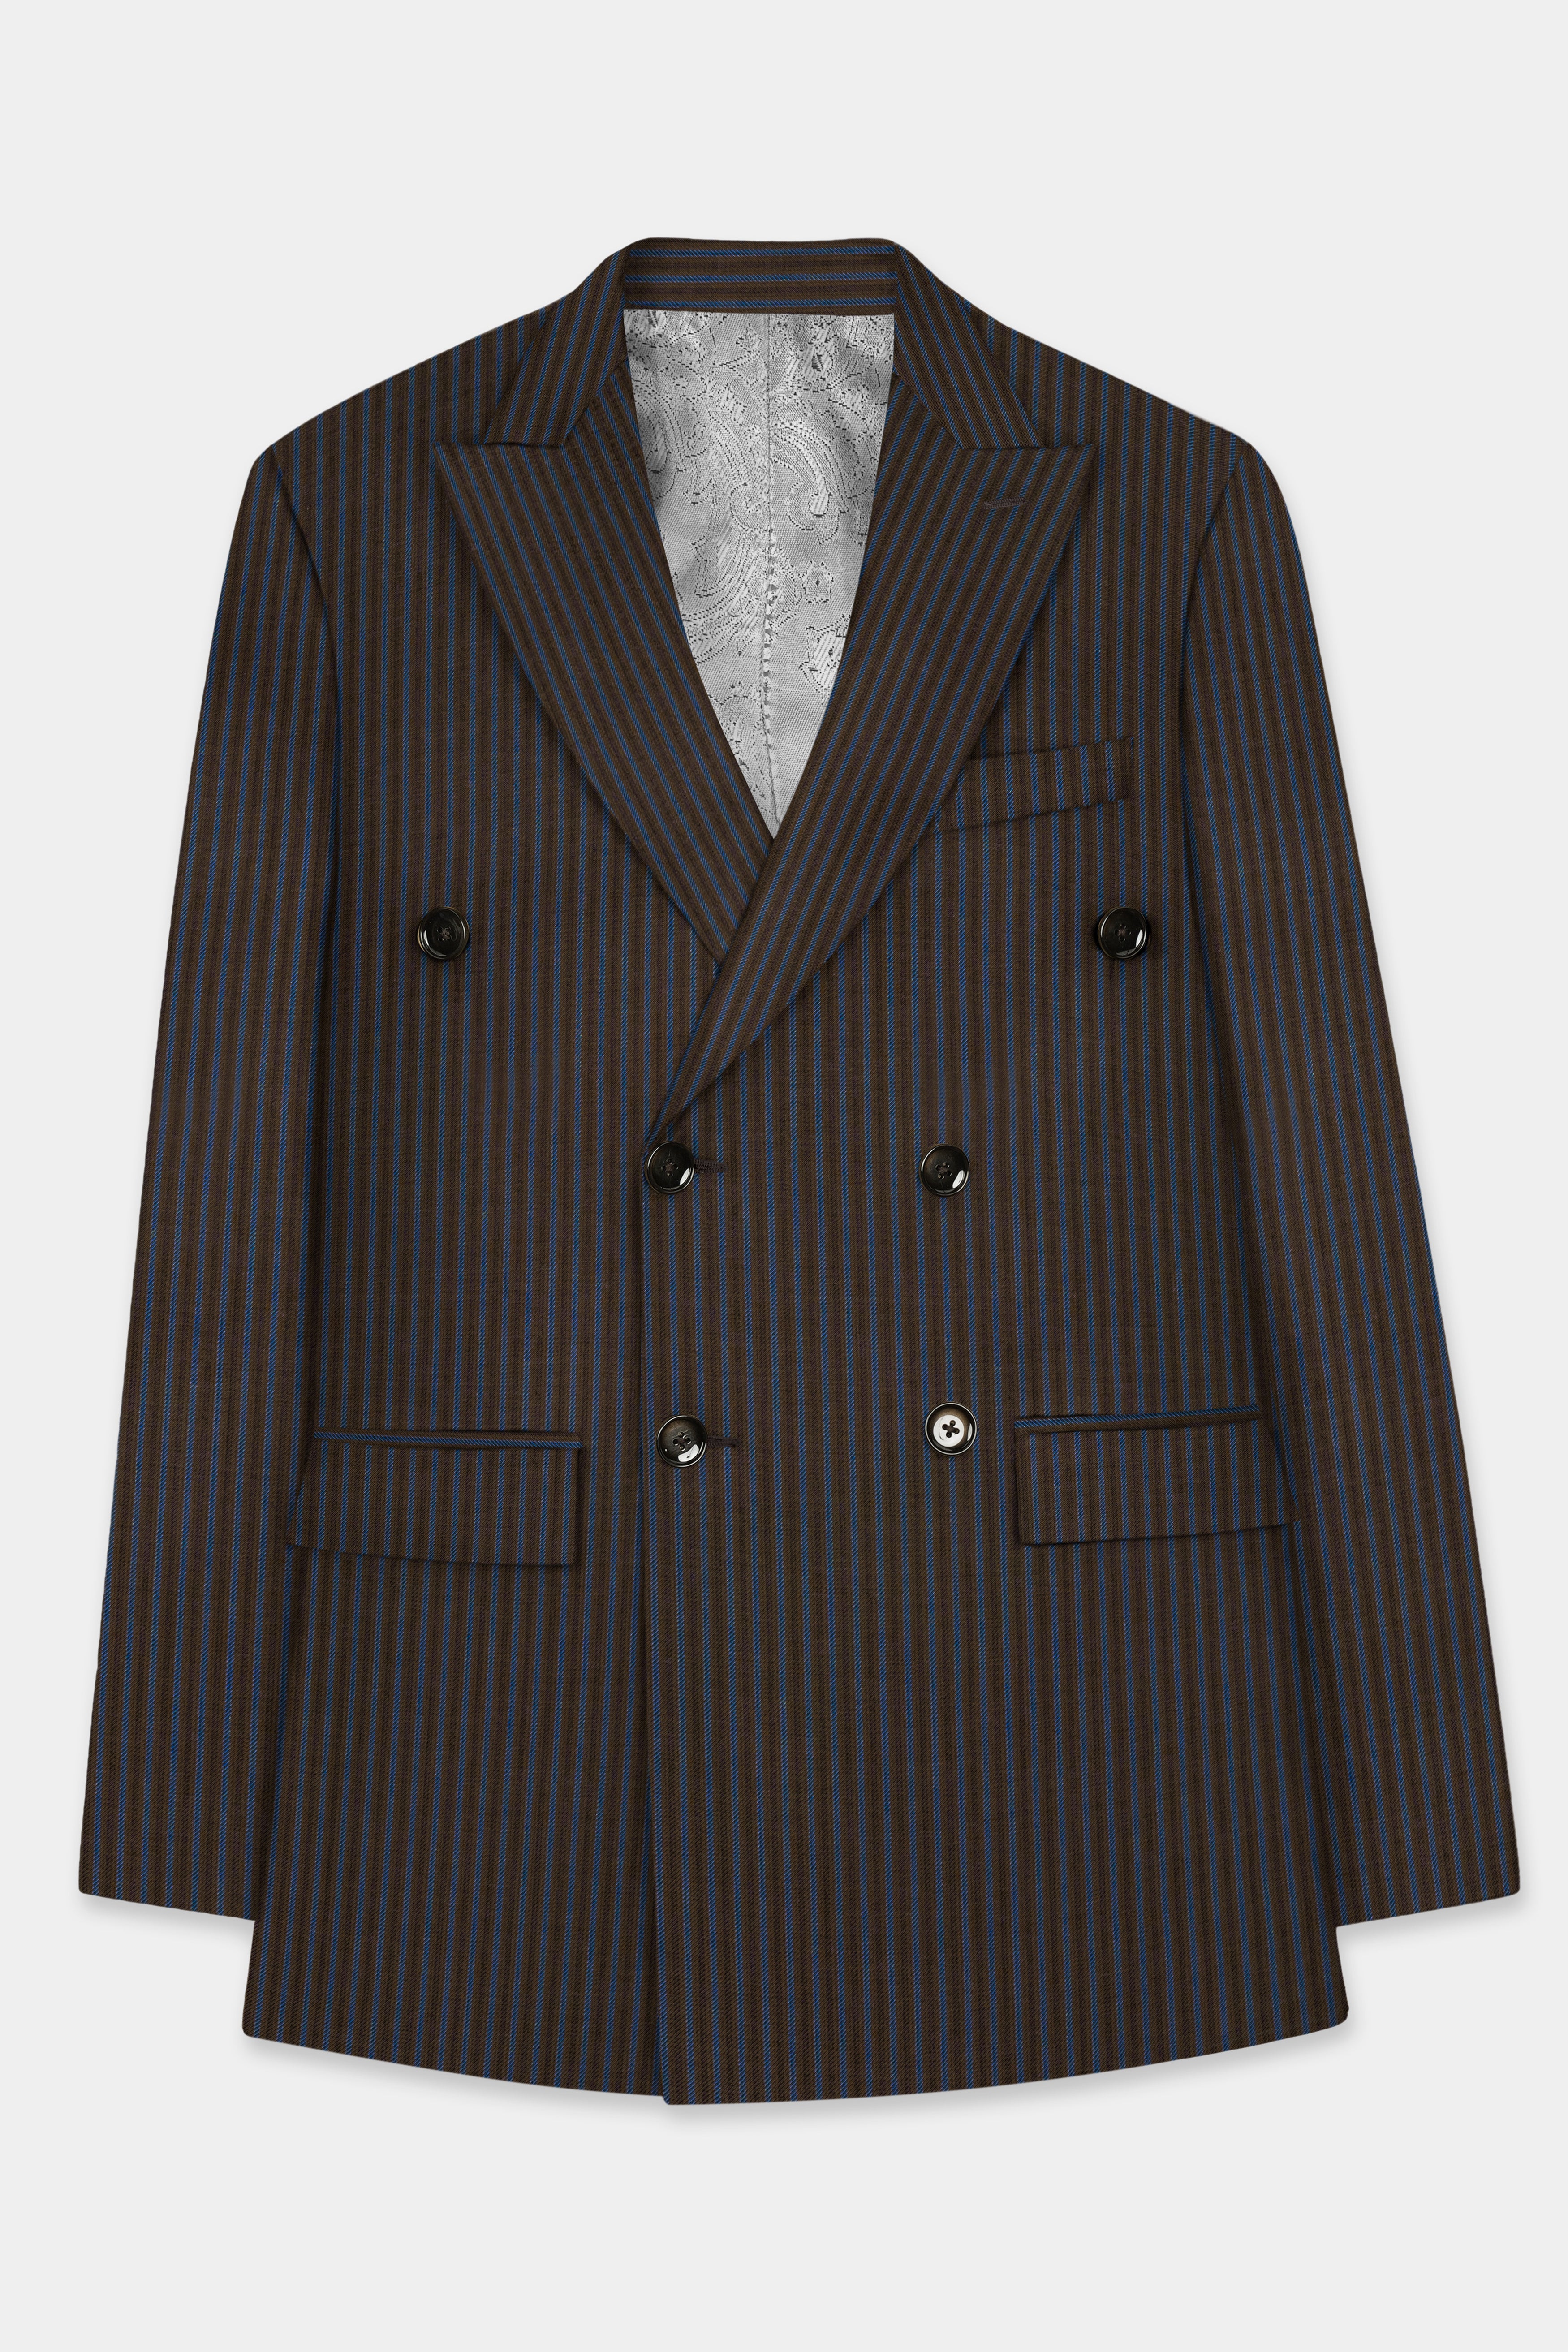 Eclipse Brown with Kashmir Blue Striped Wool Blend Double Breasted Blazer